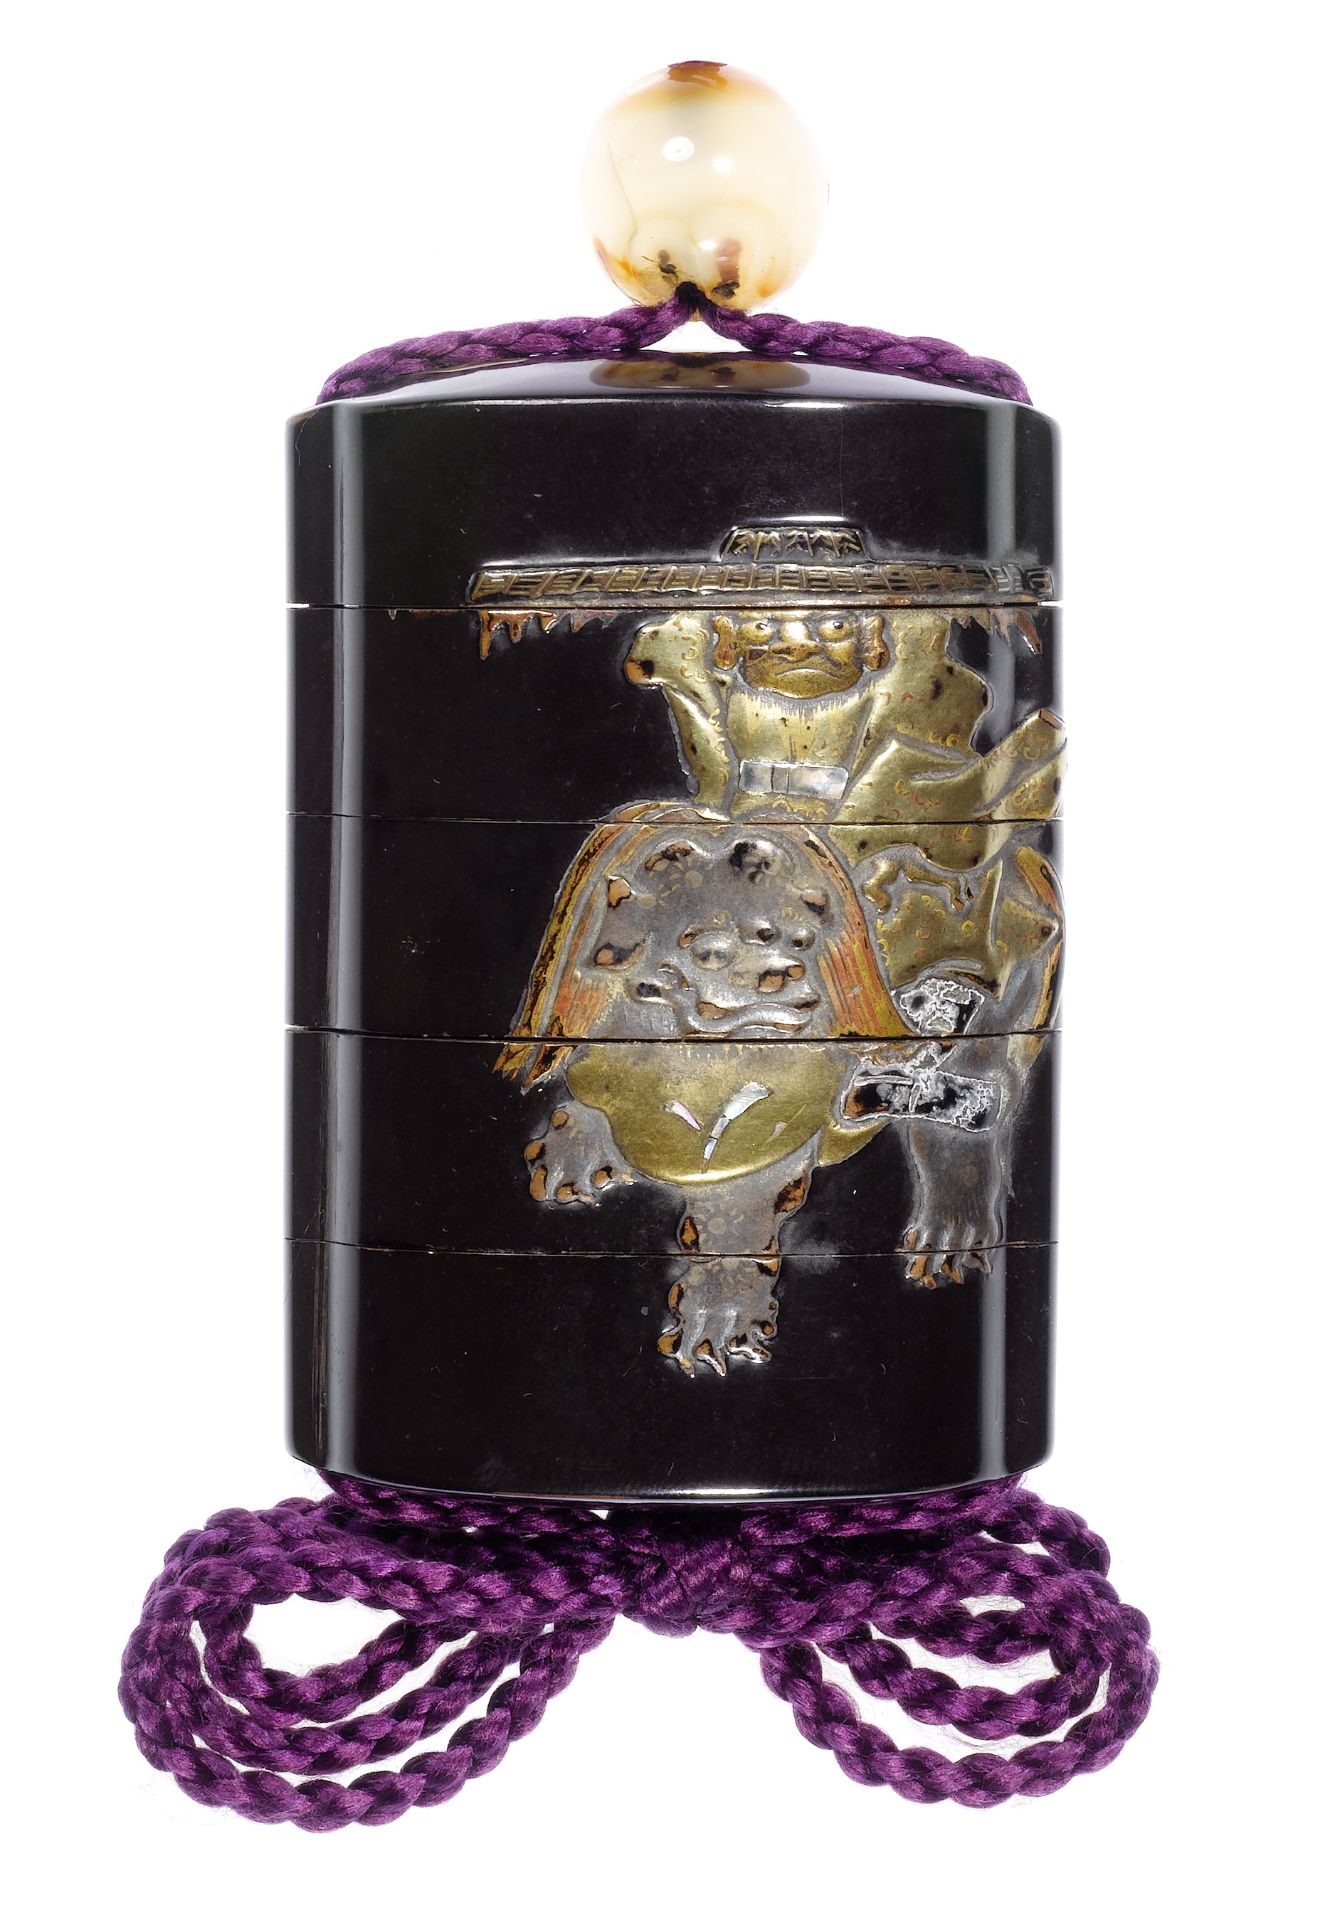 A black-lacquer four-case inro By Yamada Jokasai, 18th century